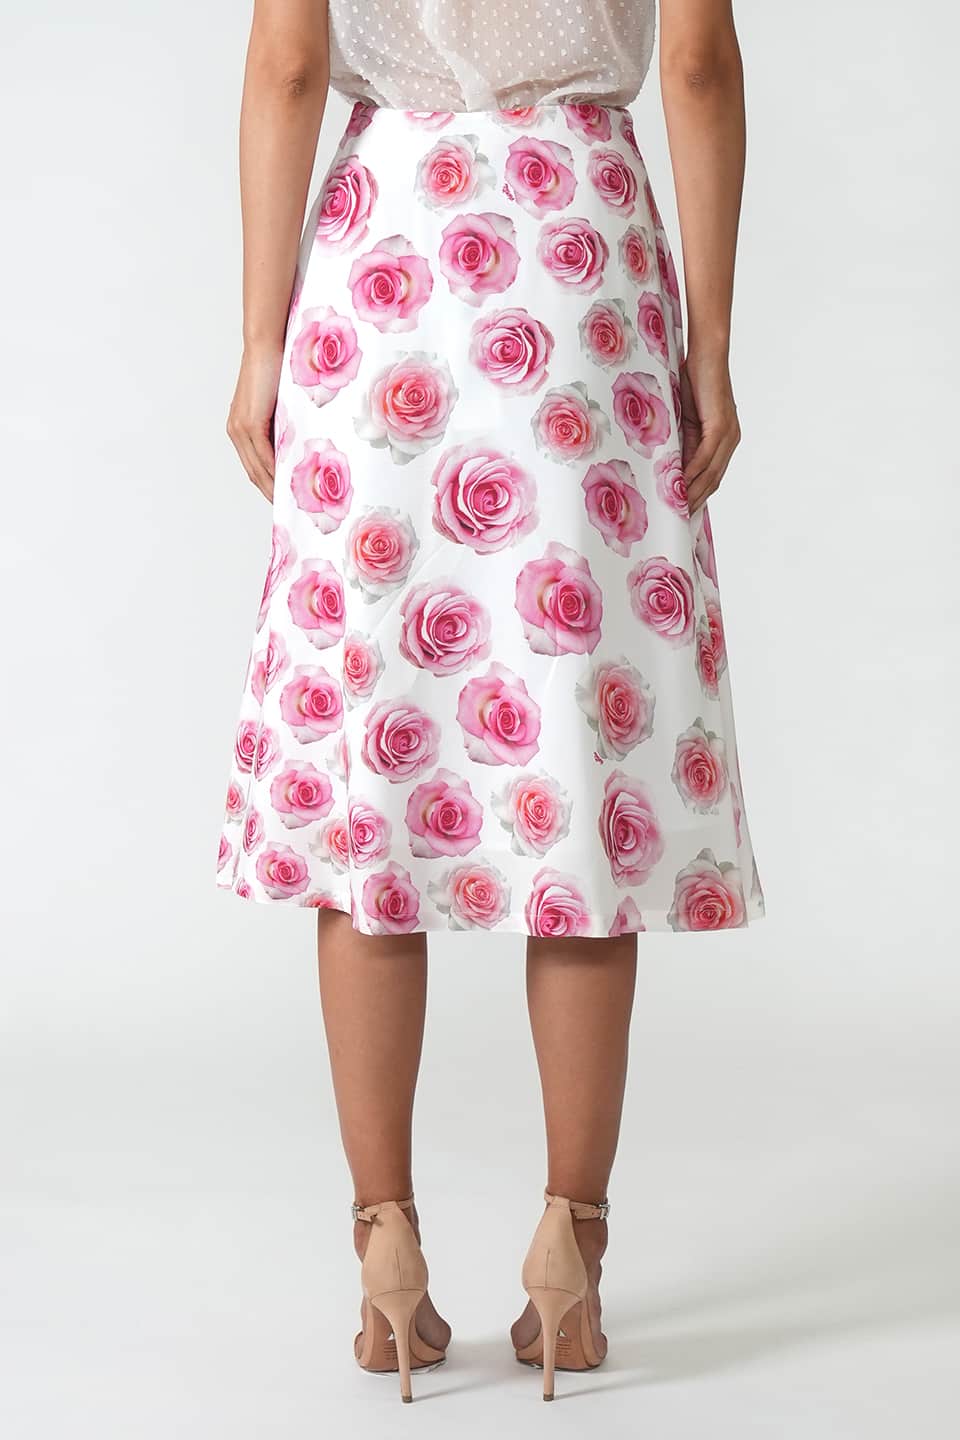 Thumbnail for Product gallery 4, Rose Print Skirt